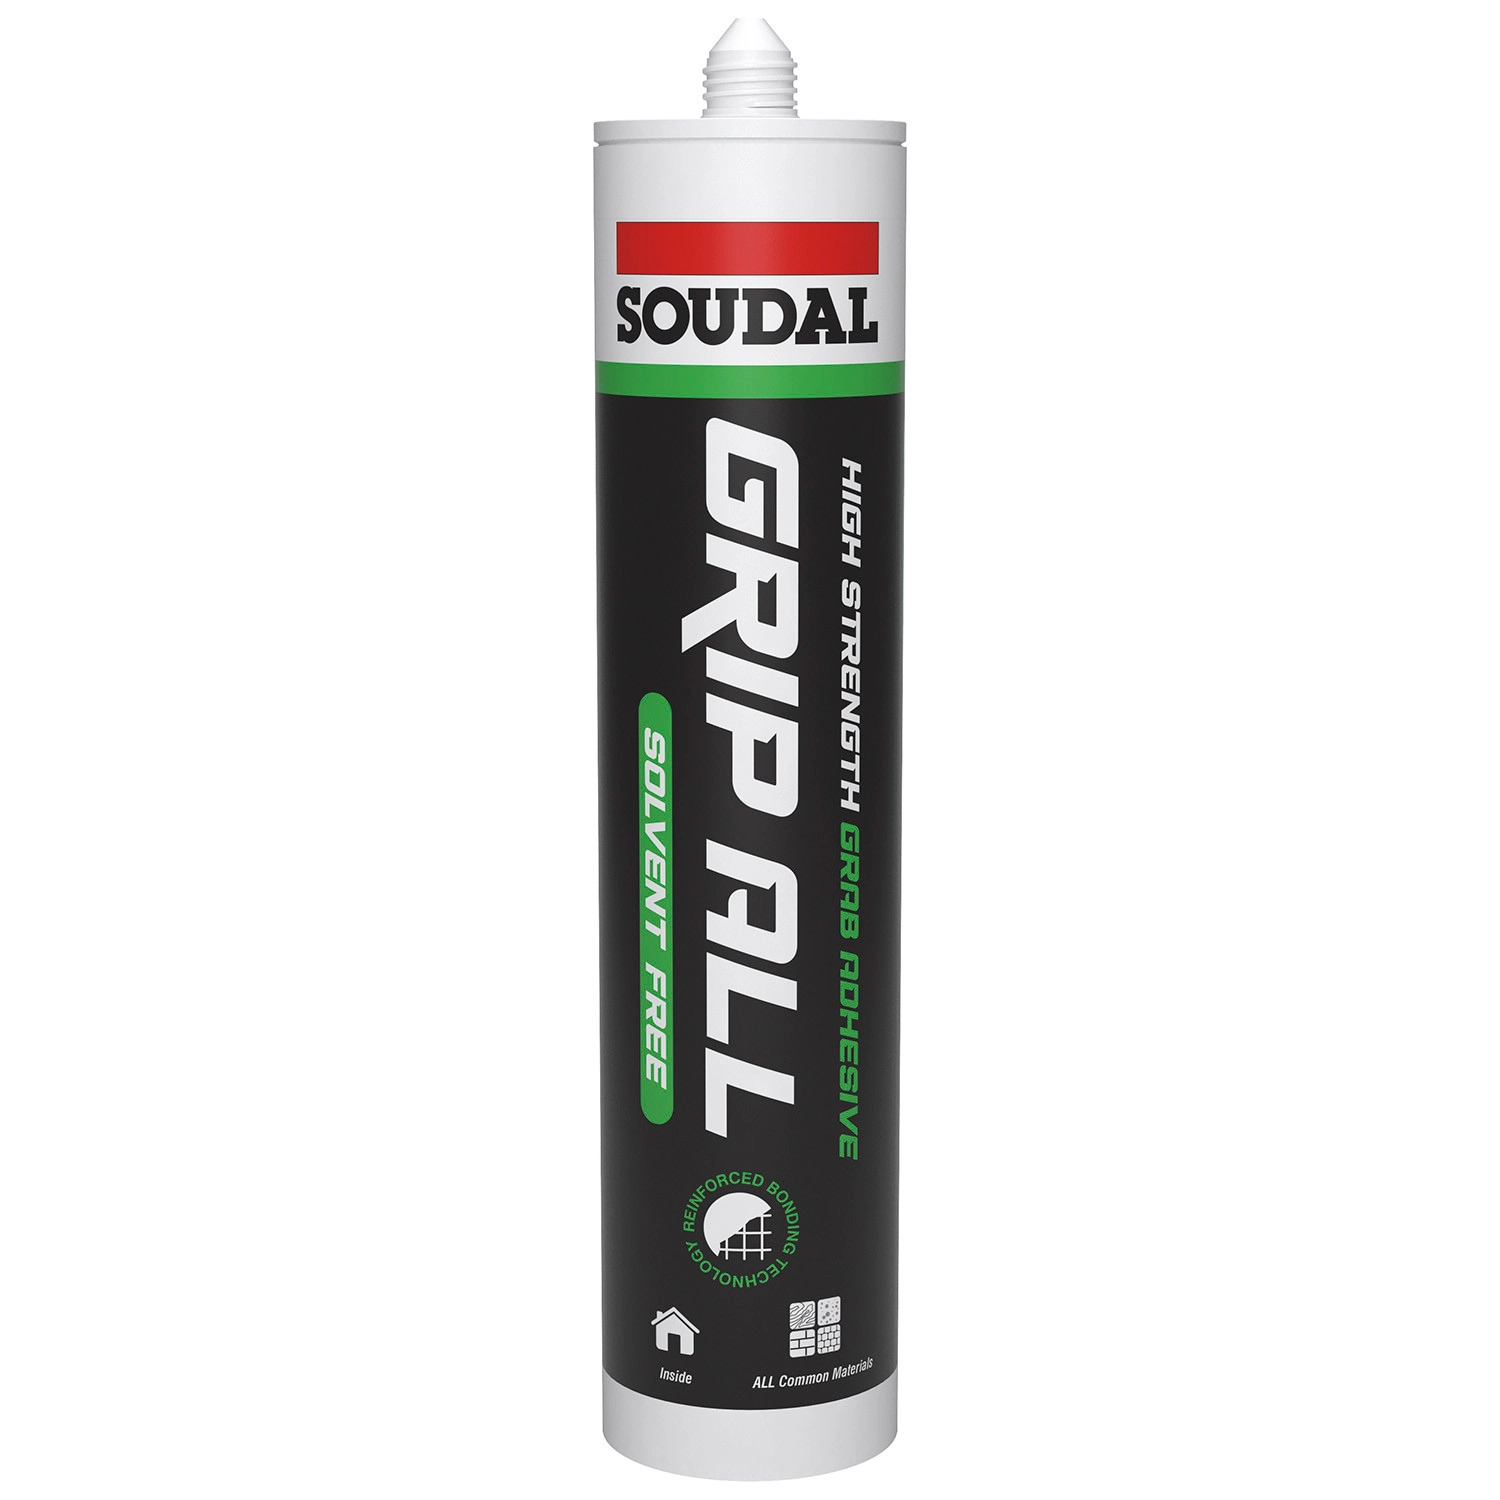 Soudal 290ml Grip All Solvent Free - White